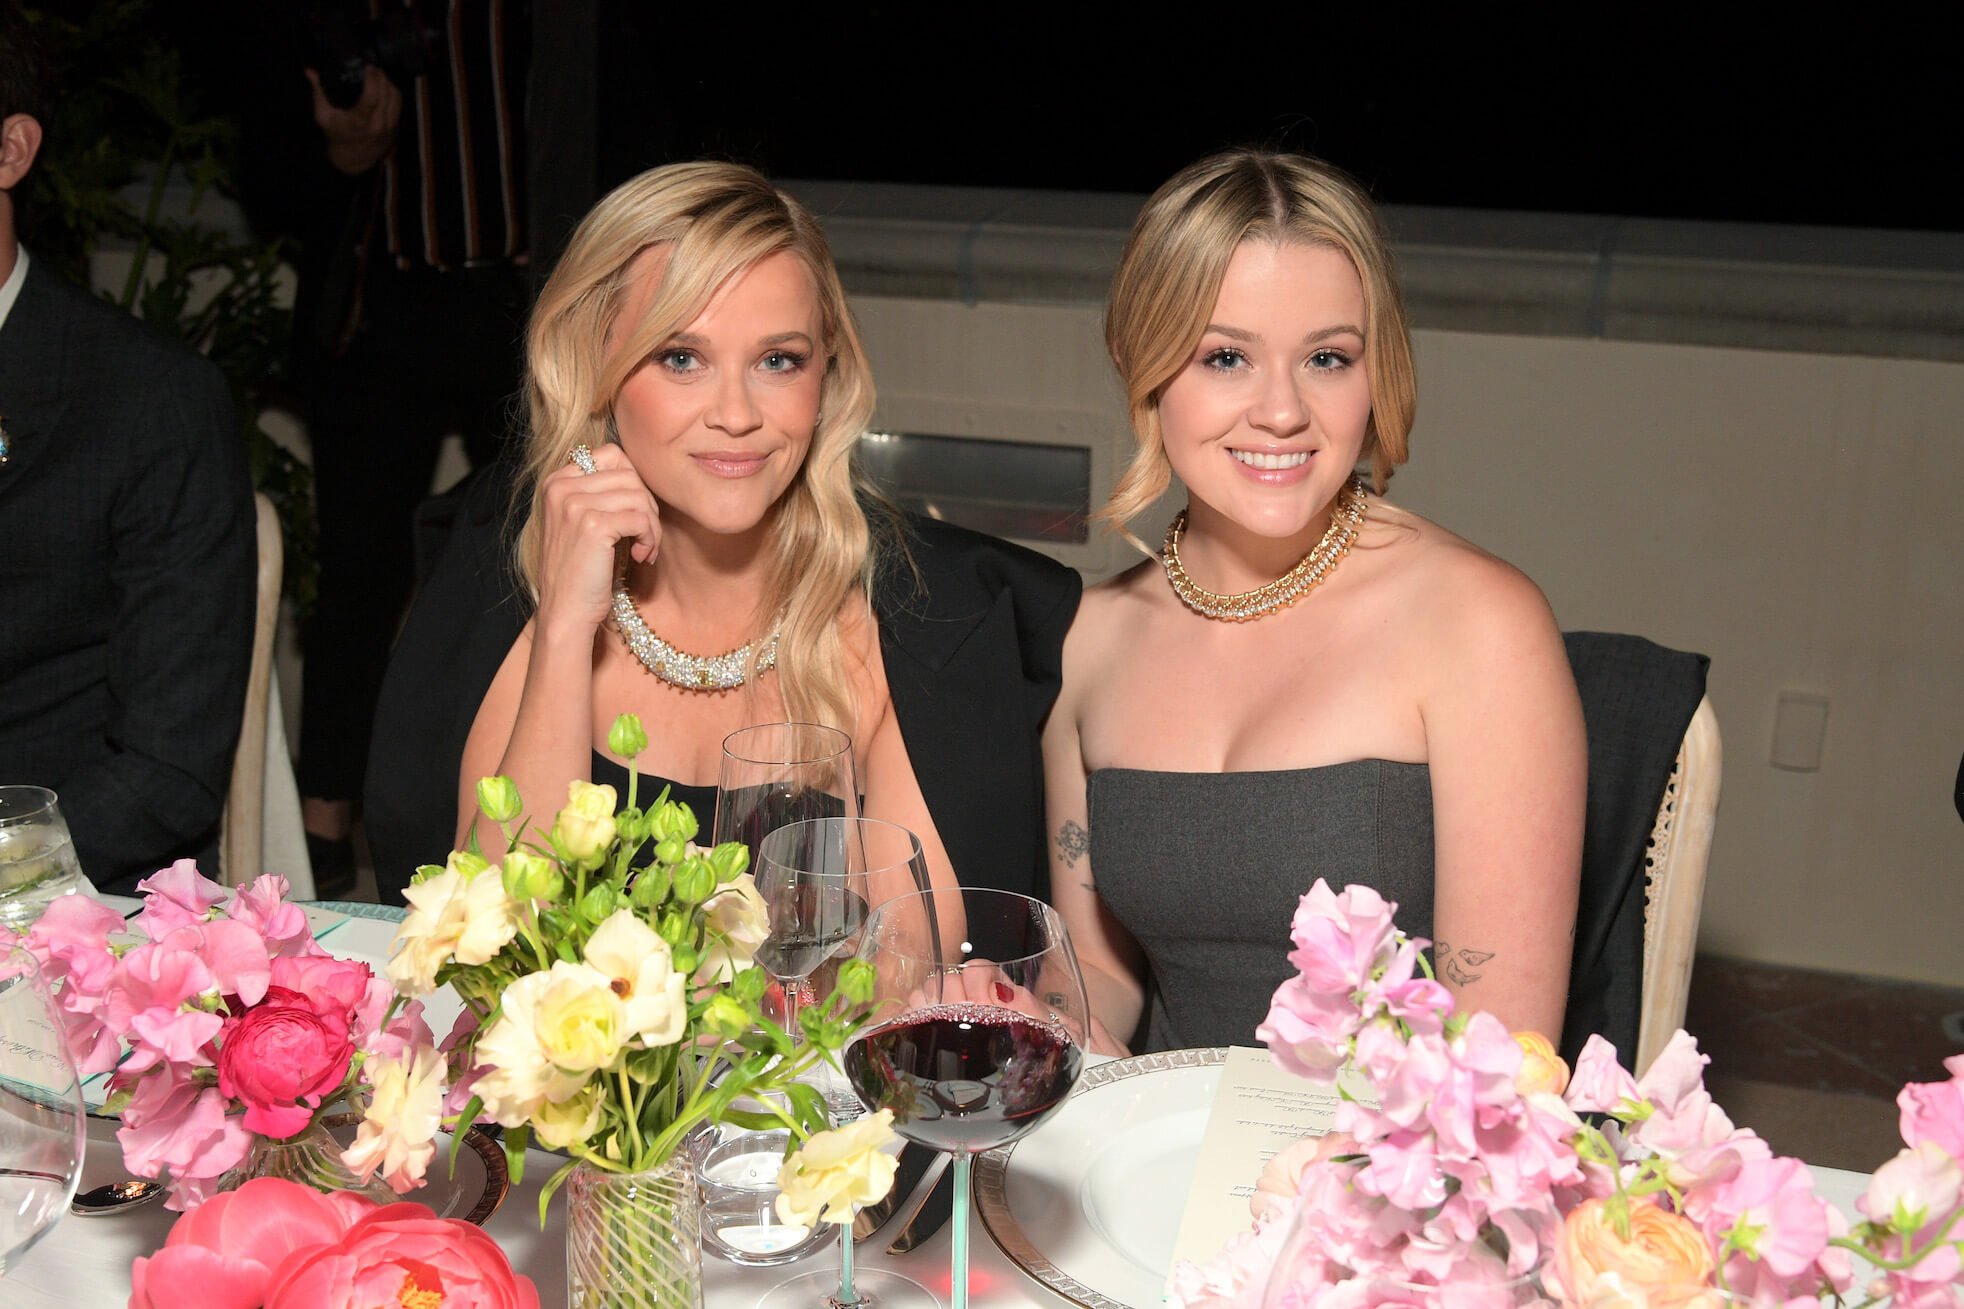 Reese Witherspoon and Ava Phillippe attend a Tiffany & Co. celebration together. They're sitting at a table wearing similar black strapless gowns.